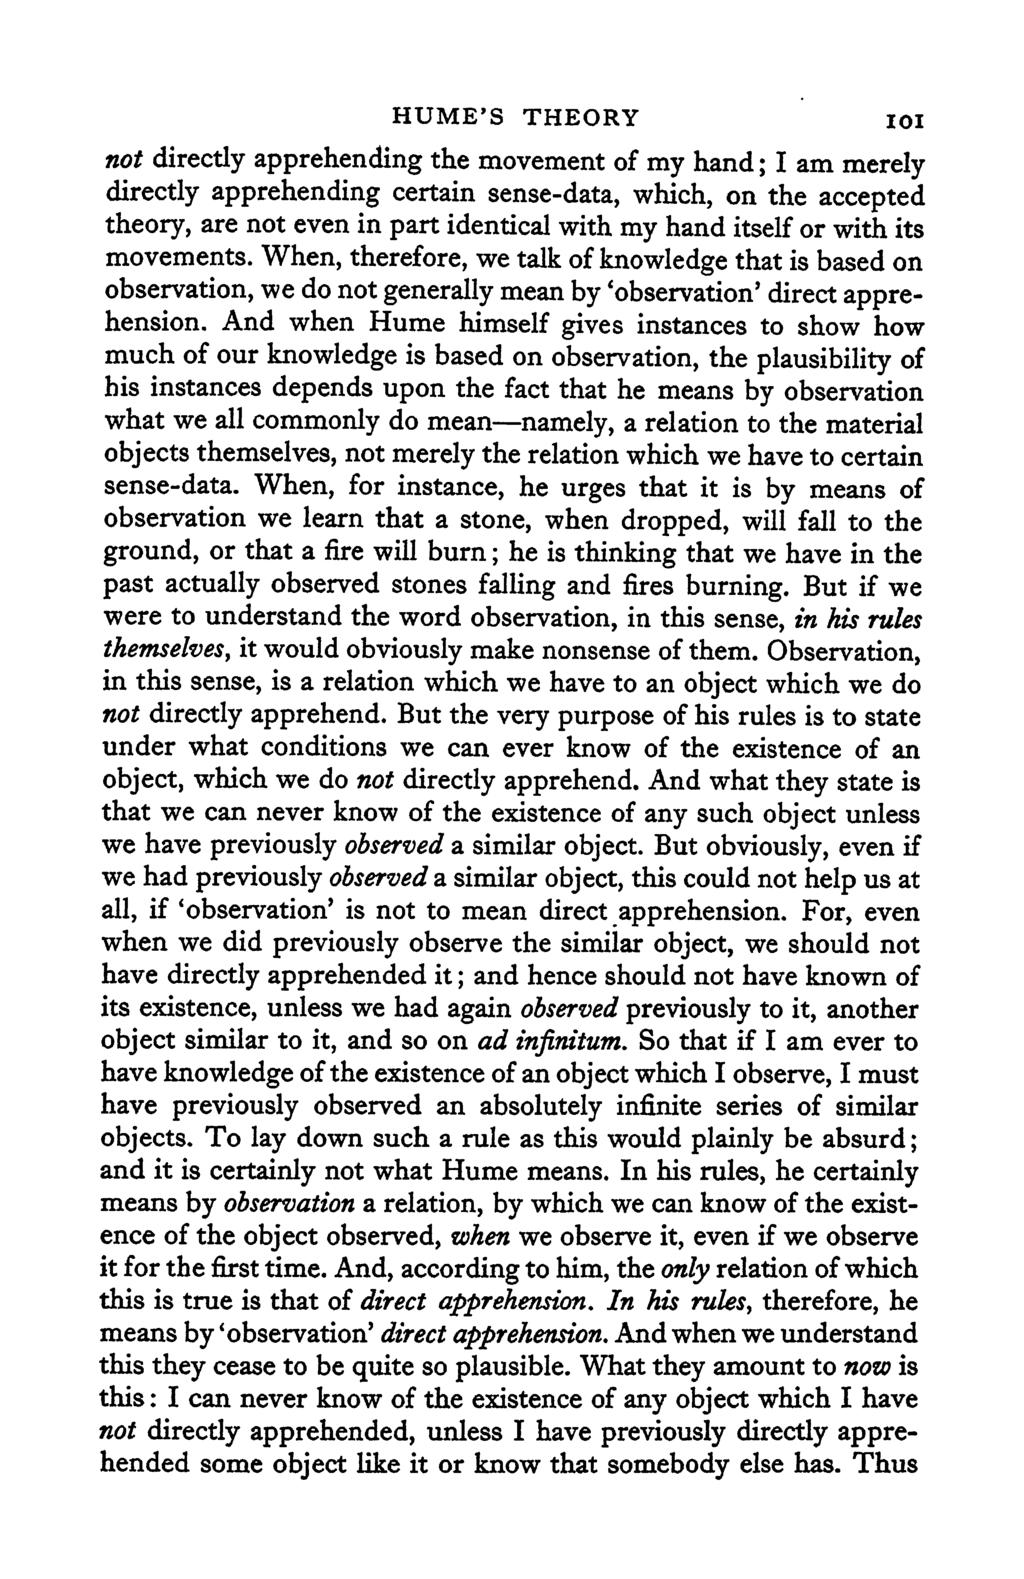 HUME'S THEORY IOI not directly apprehending the movement of my hand; I am merely directly apprehending certain sense-data, which, on the accepted theory, are not even in part identical with my hand